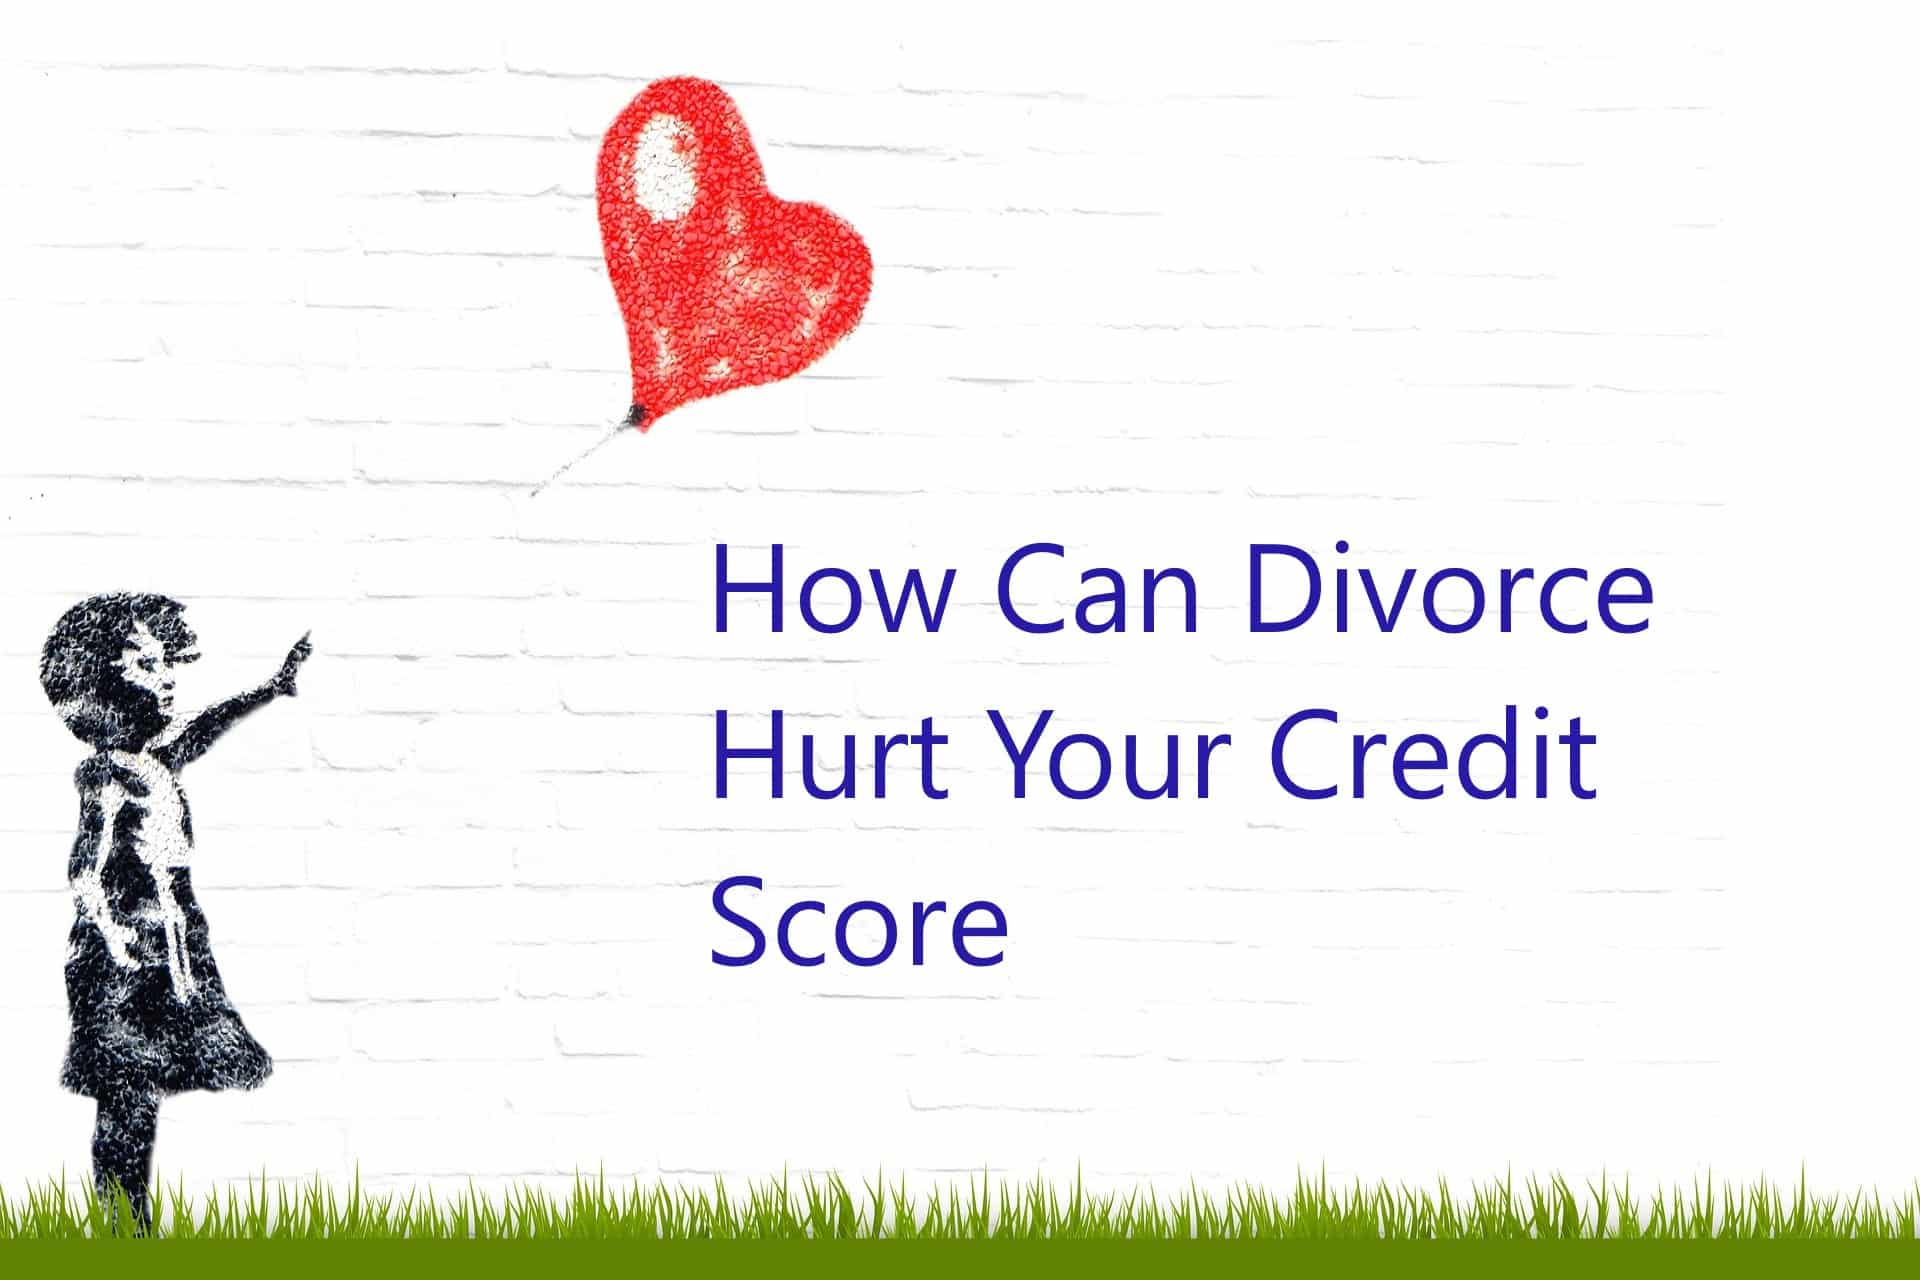 Can divorce impact your credit score? Here is how to protect yourself financially when splitting up